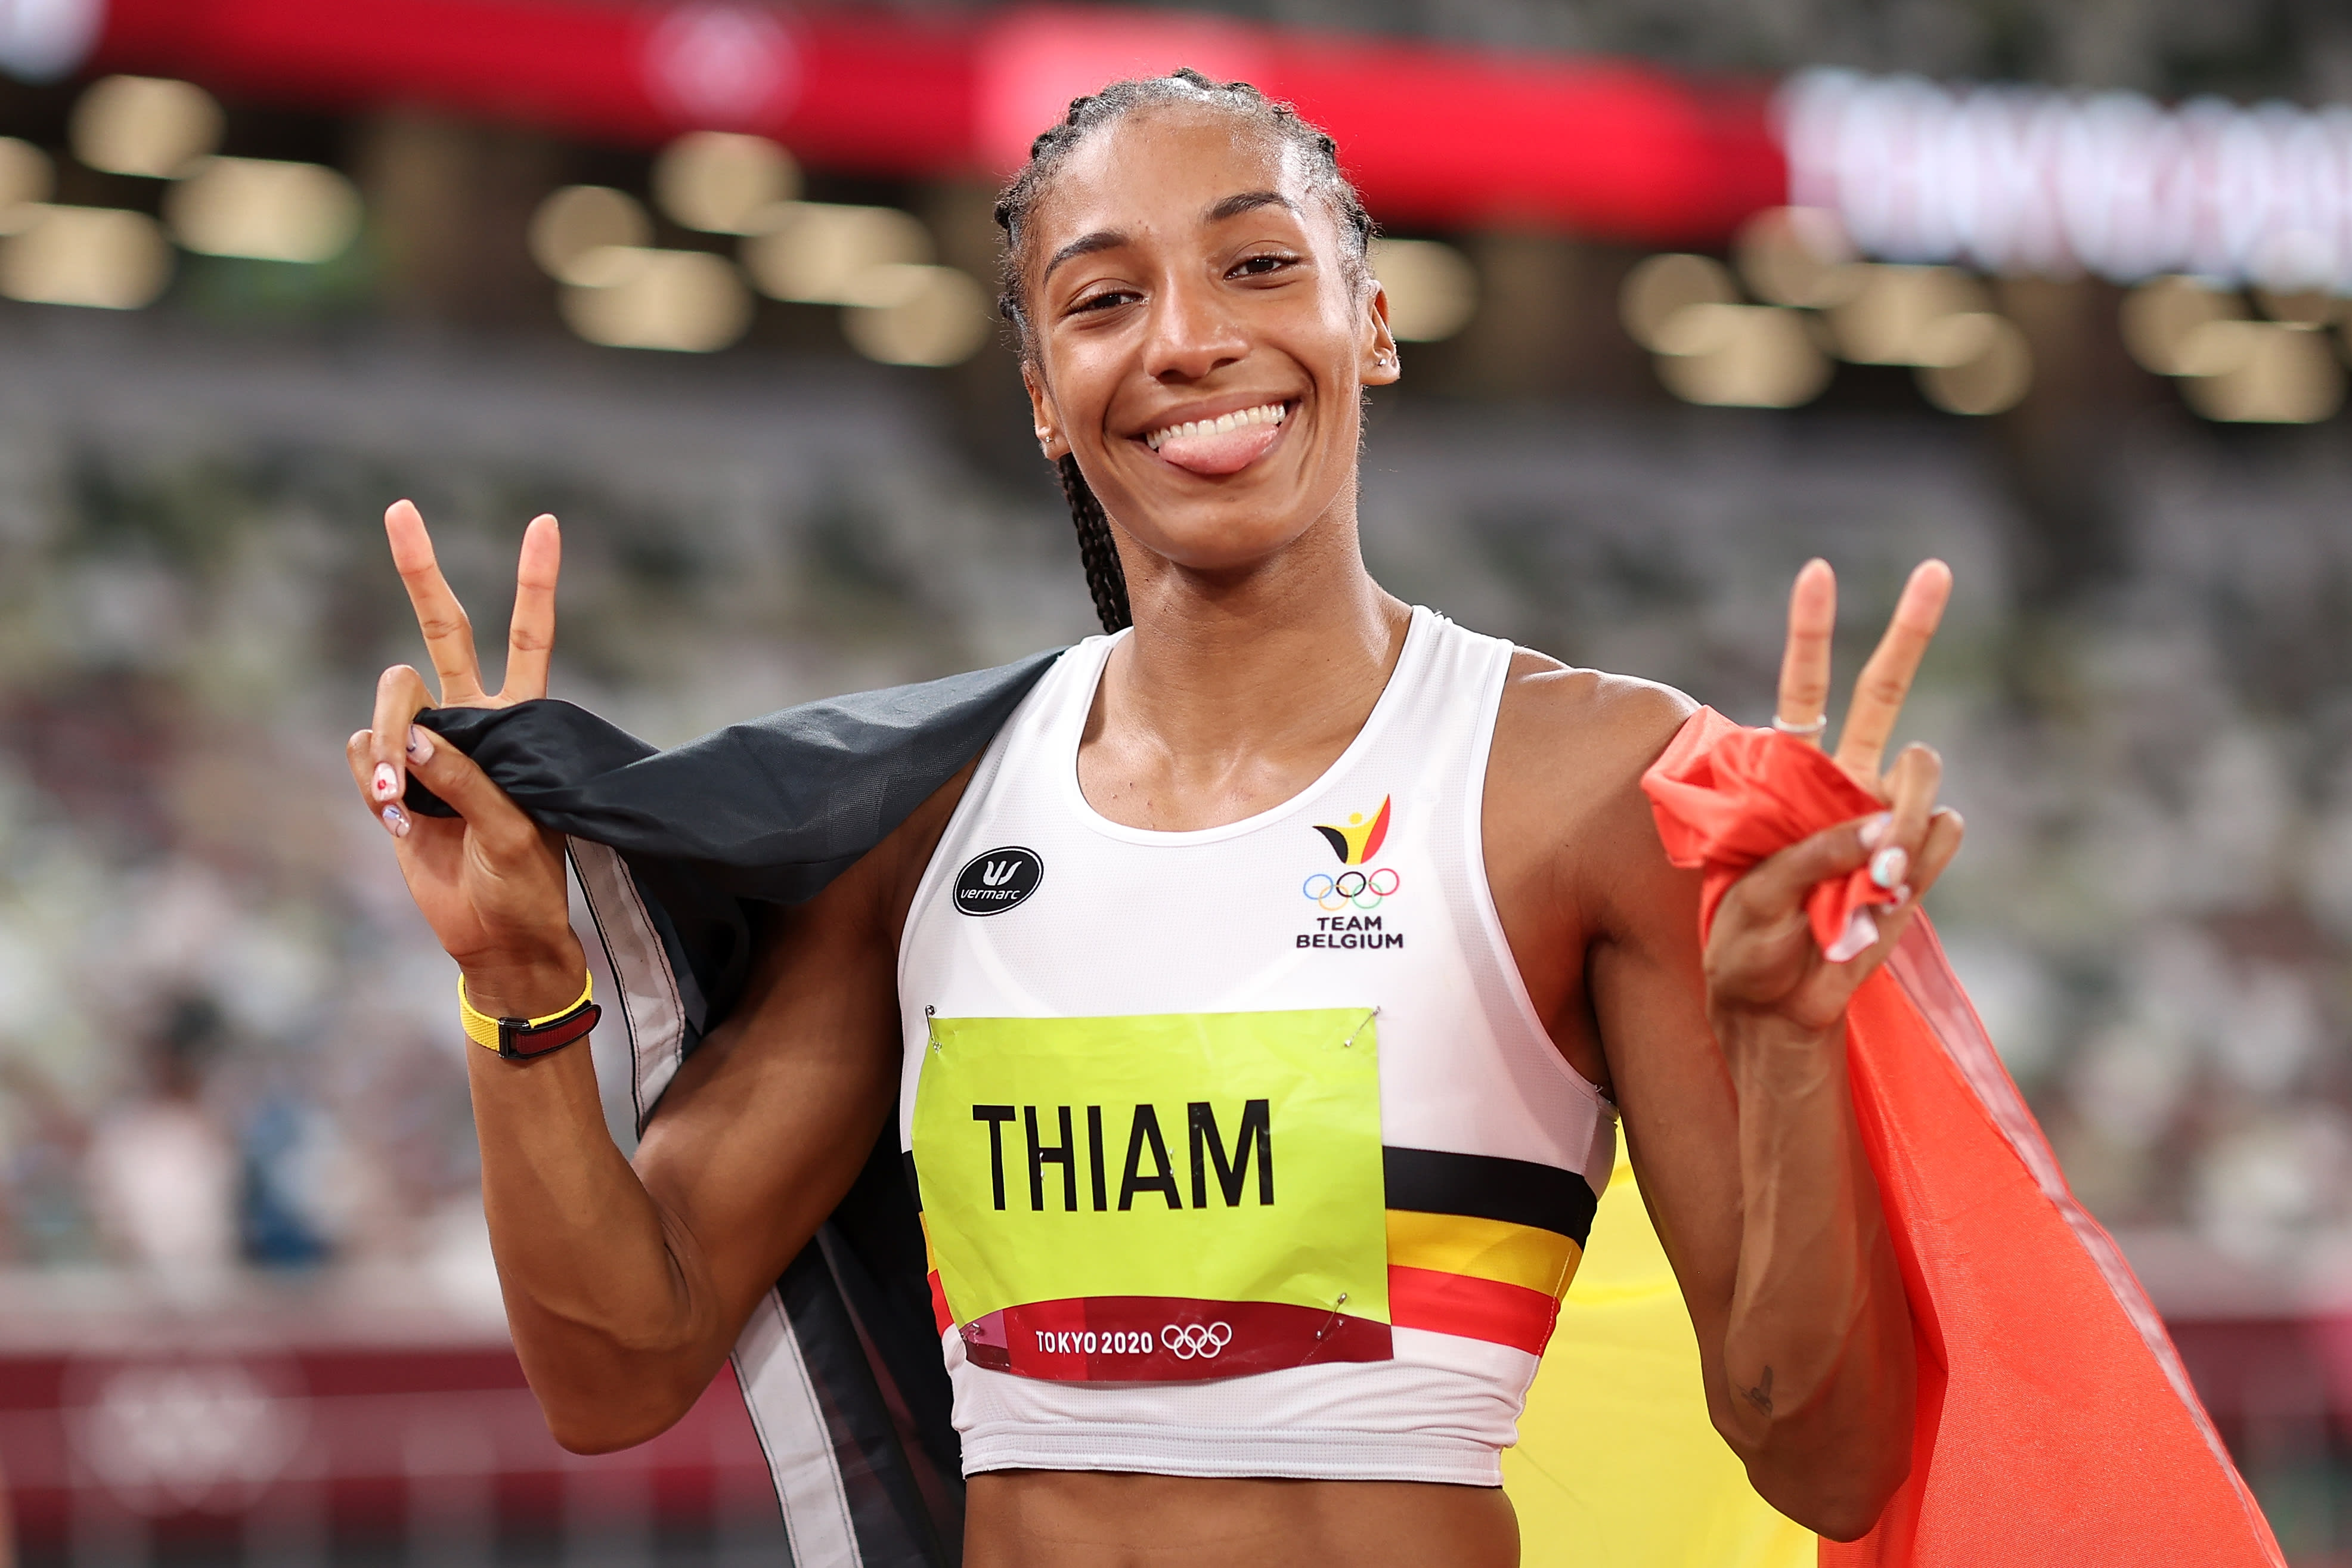 2023 European Athletics Indoor Championships Full schedule and how to watch live